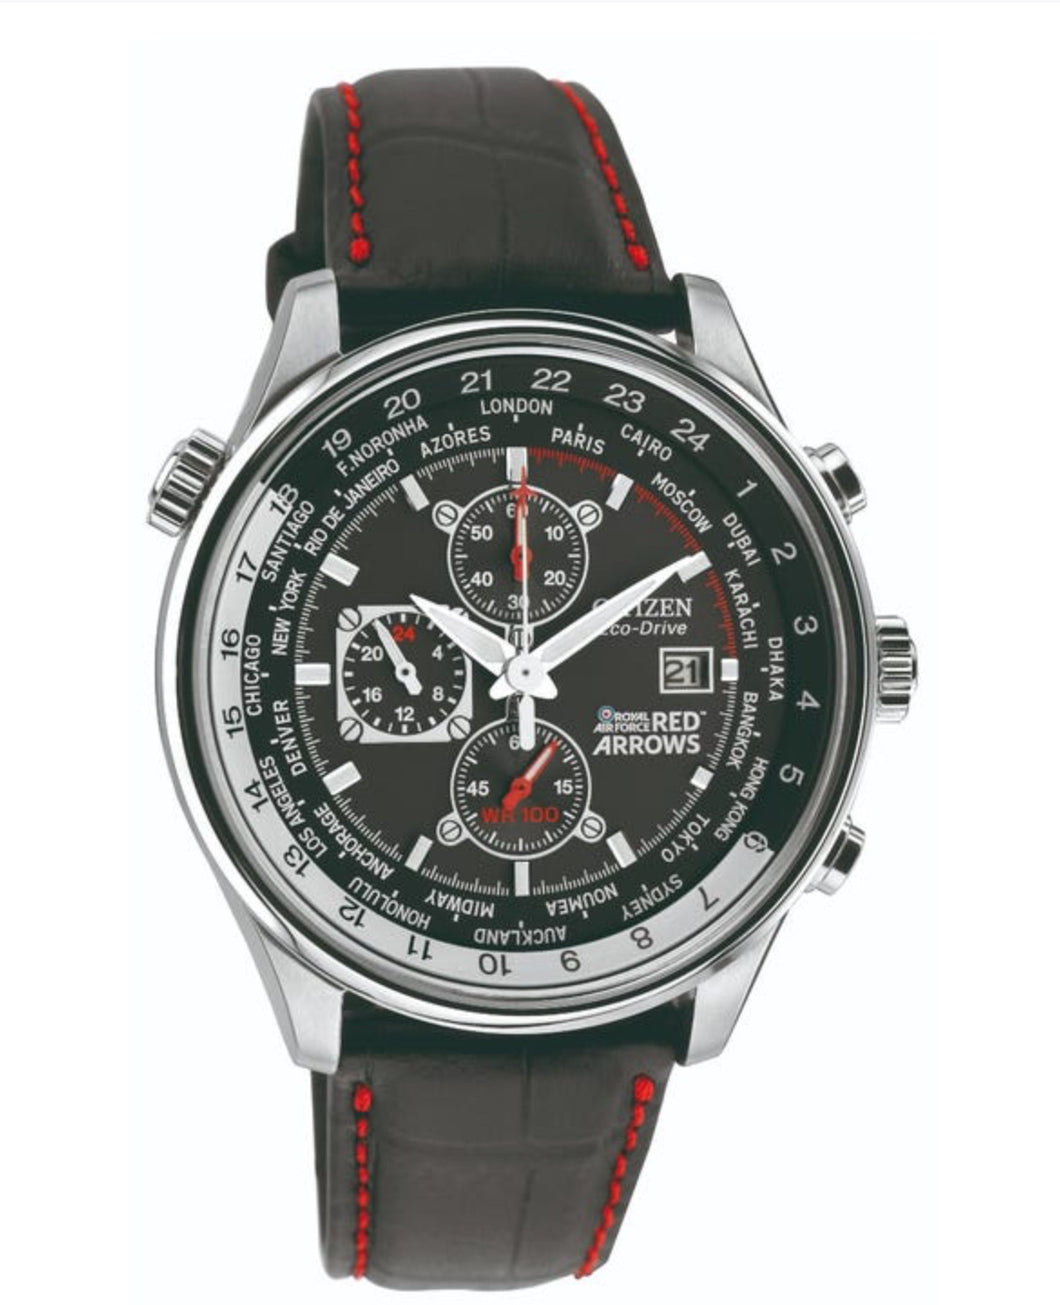 RED ARROWS CHRONOGRAPH - GENTS TIMEPIECE